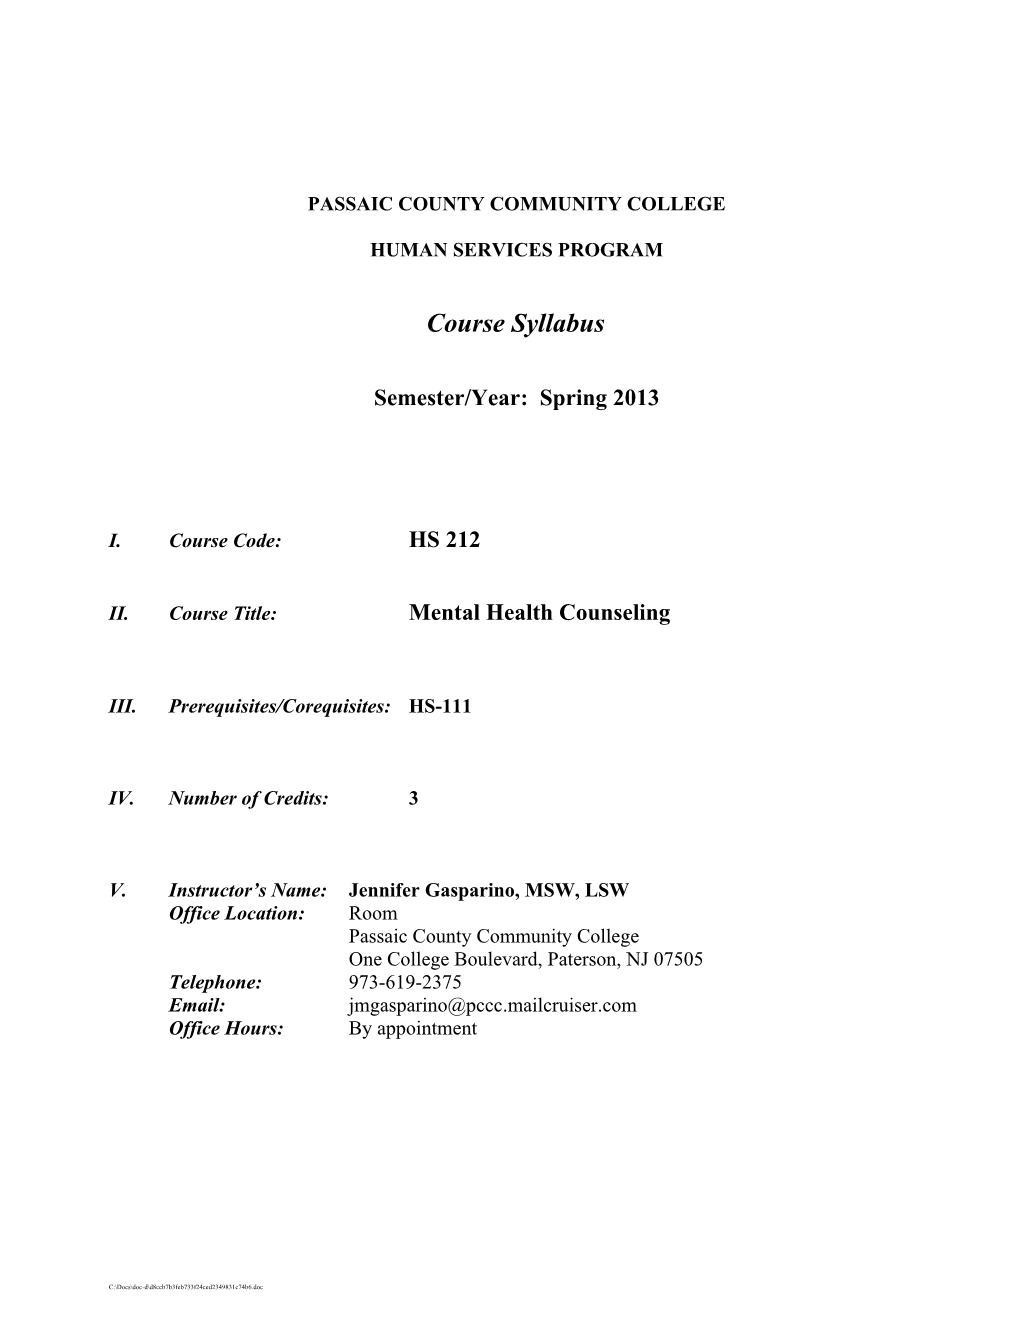 HS-212, Mental Health Counseling